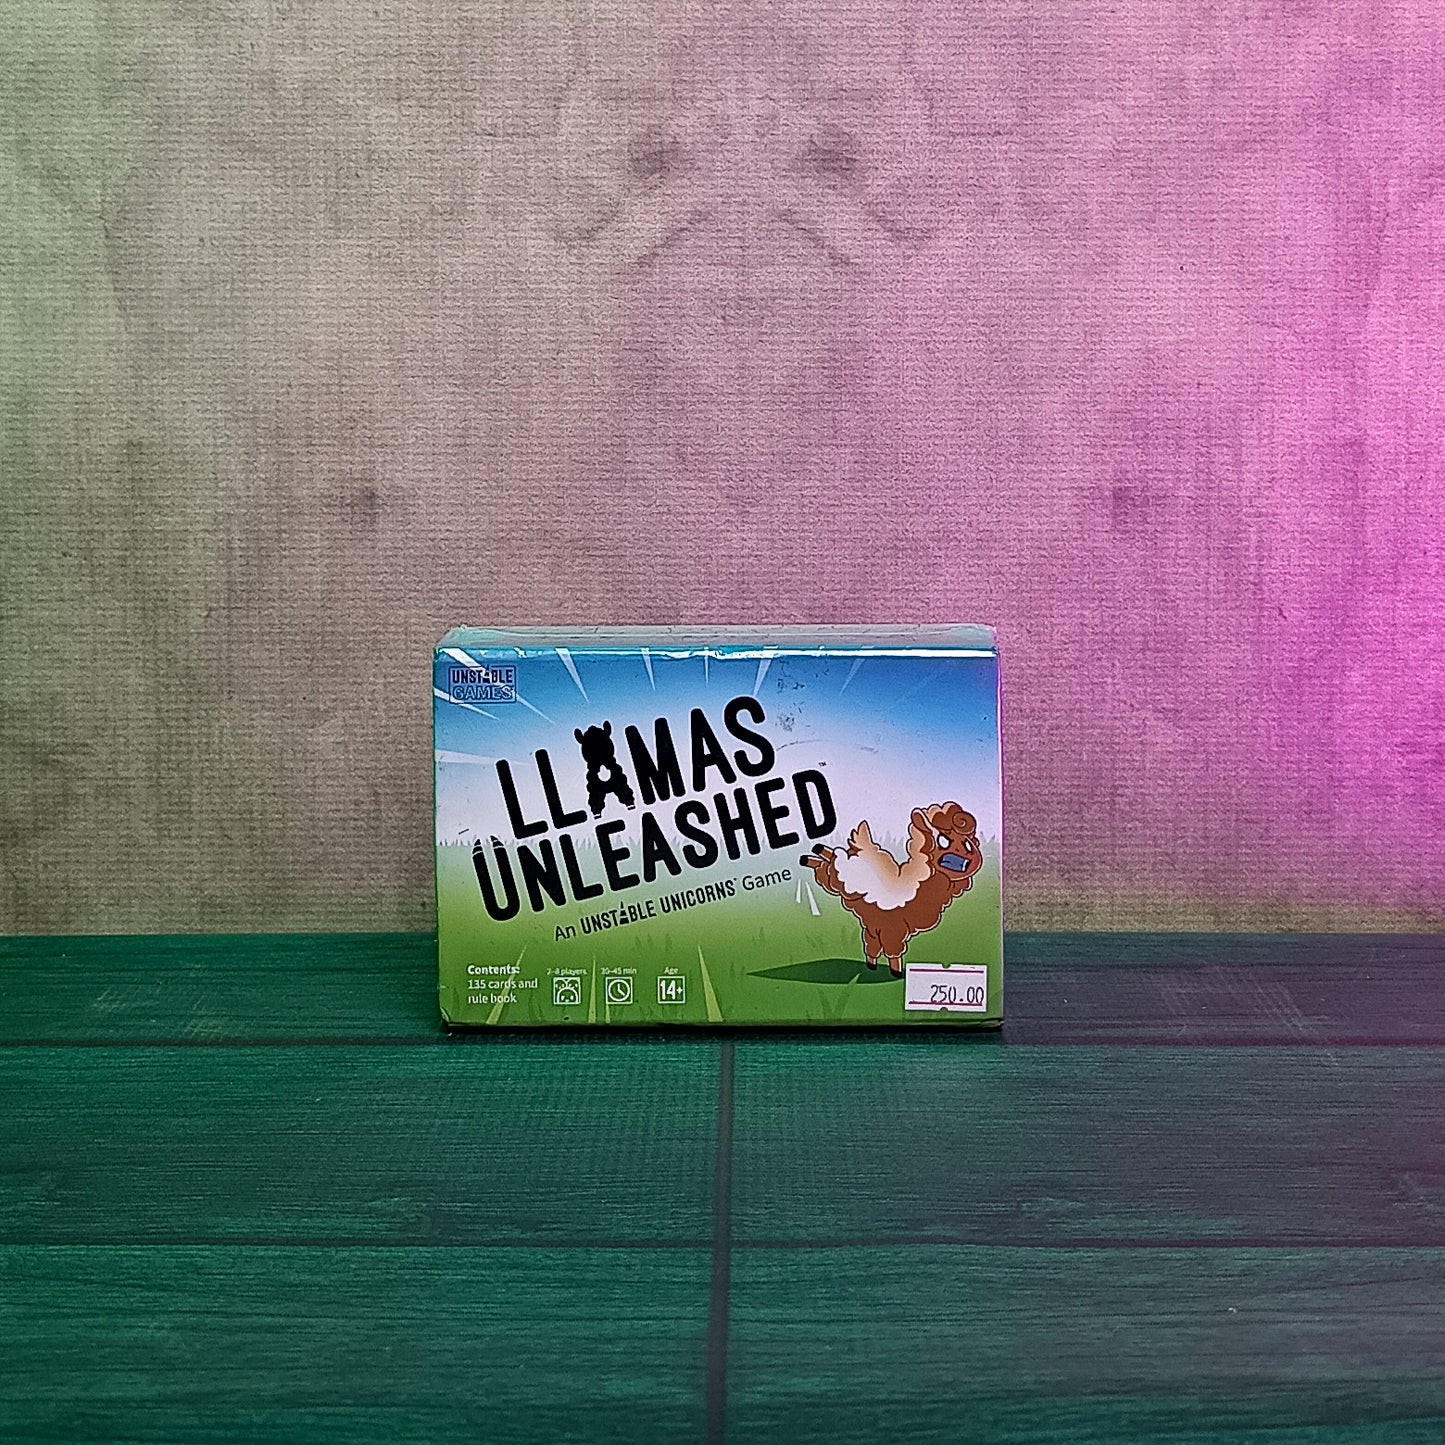 Llamas Unleashed An Unstable Unicorns Game